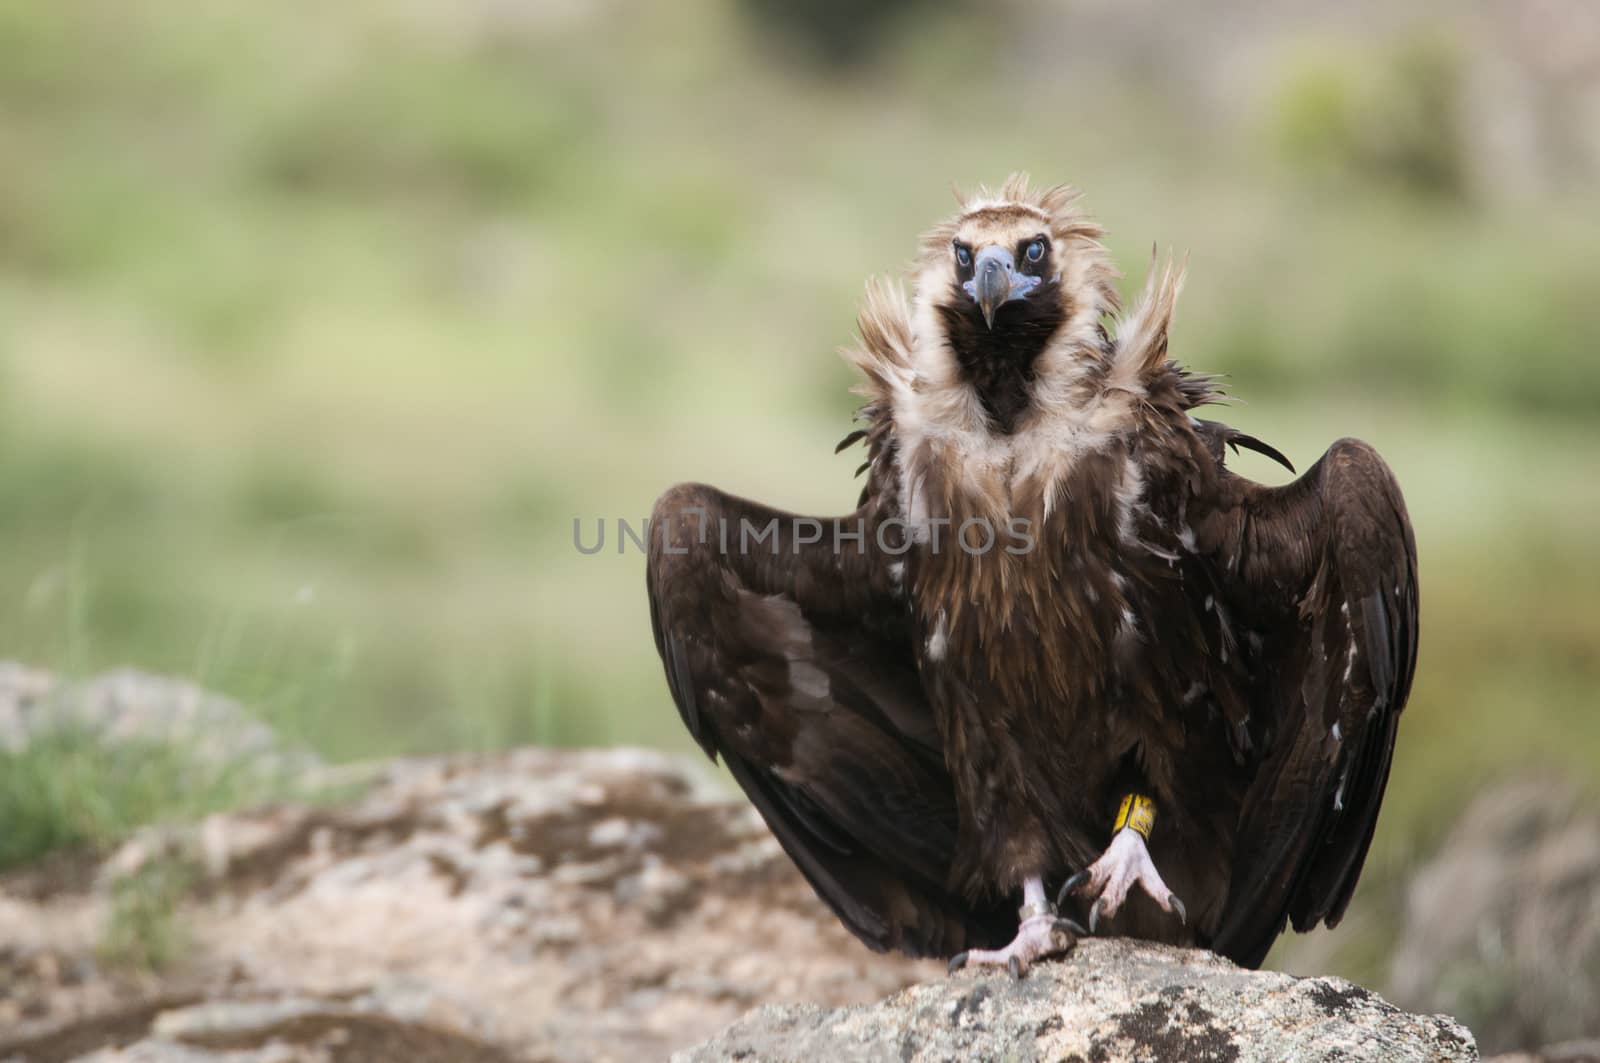 Cinereous Vulture, Aegypius monachus, standing on a rock